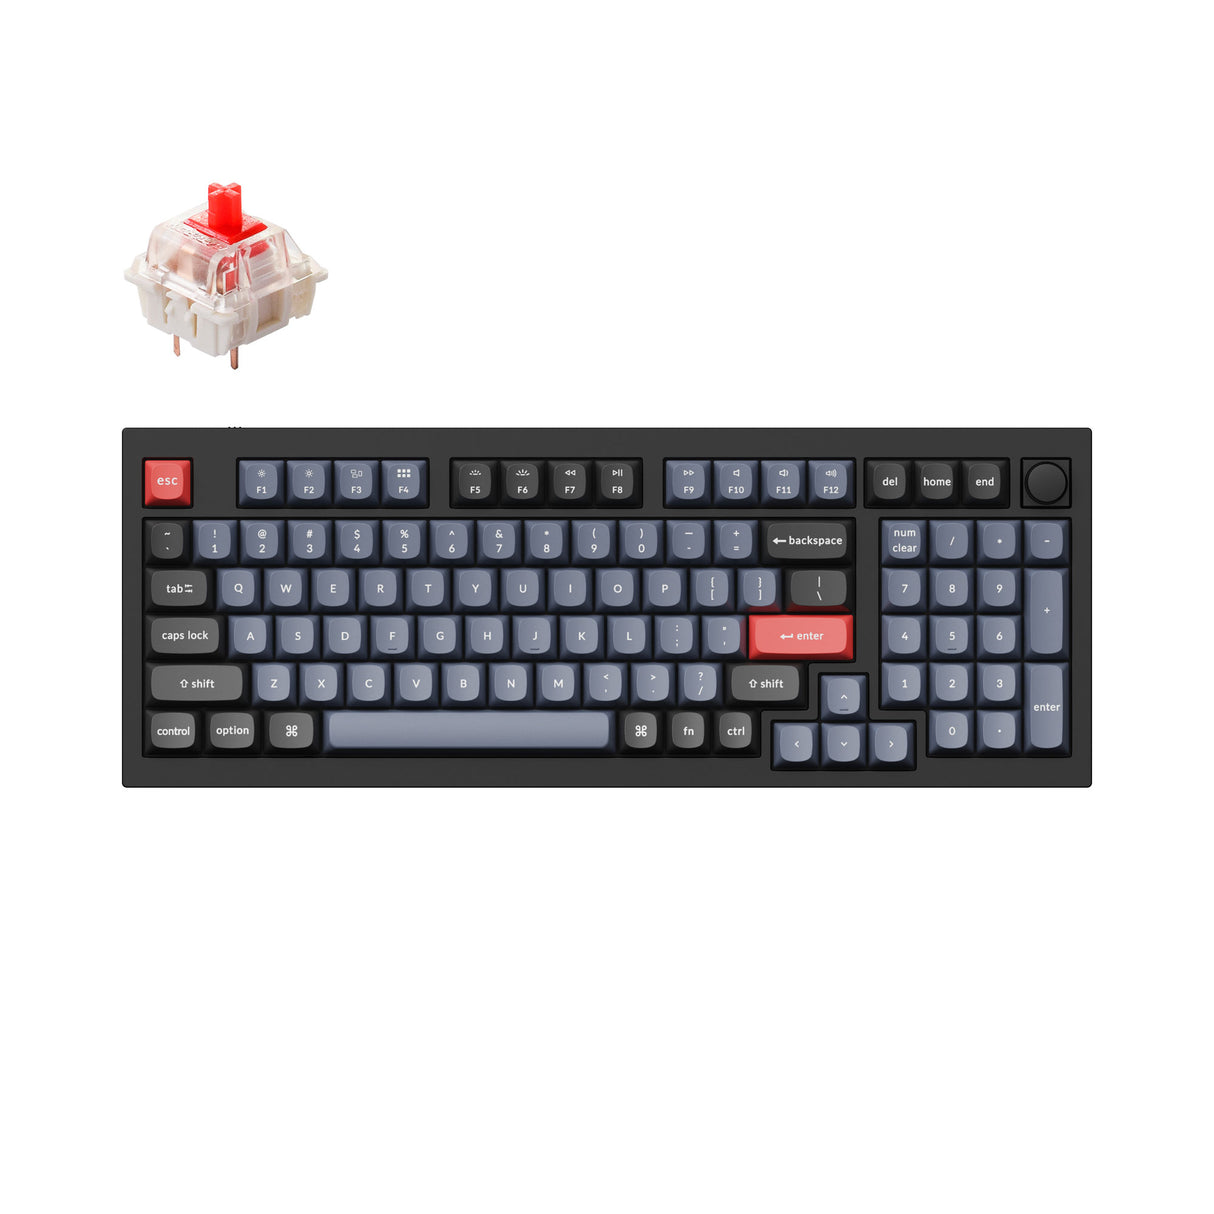 Keychron Q5 QMK VIA custom mechanical keyboard 1800 compact 96 percent layout full aluminum black frame knob for Mac Windows RGB backlight with hot swappable Gateron G Pro switch red